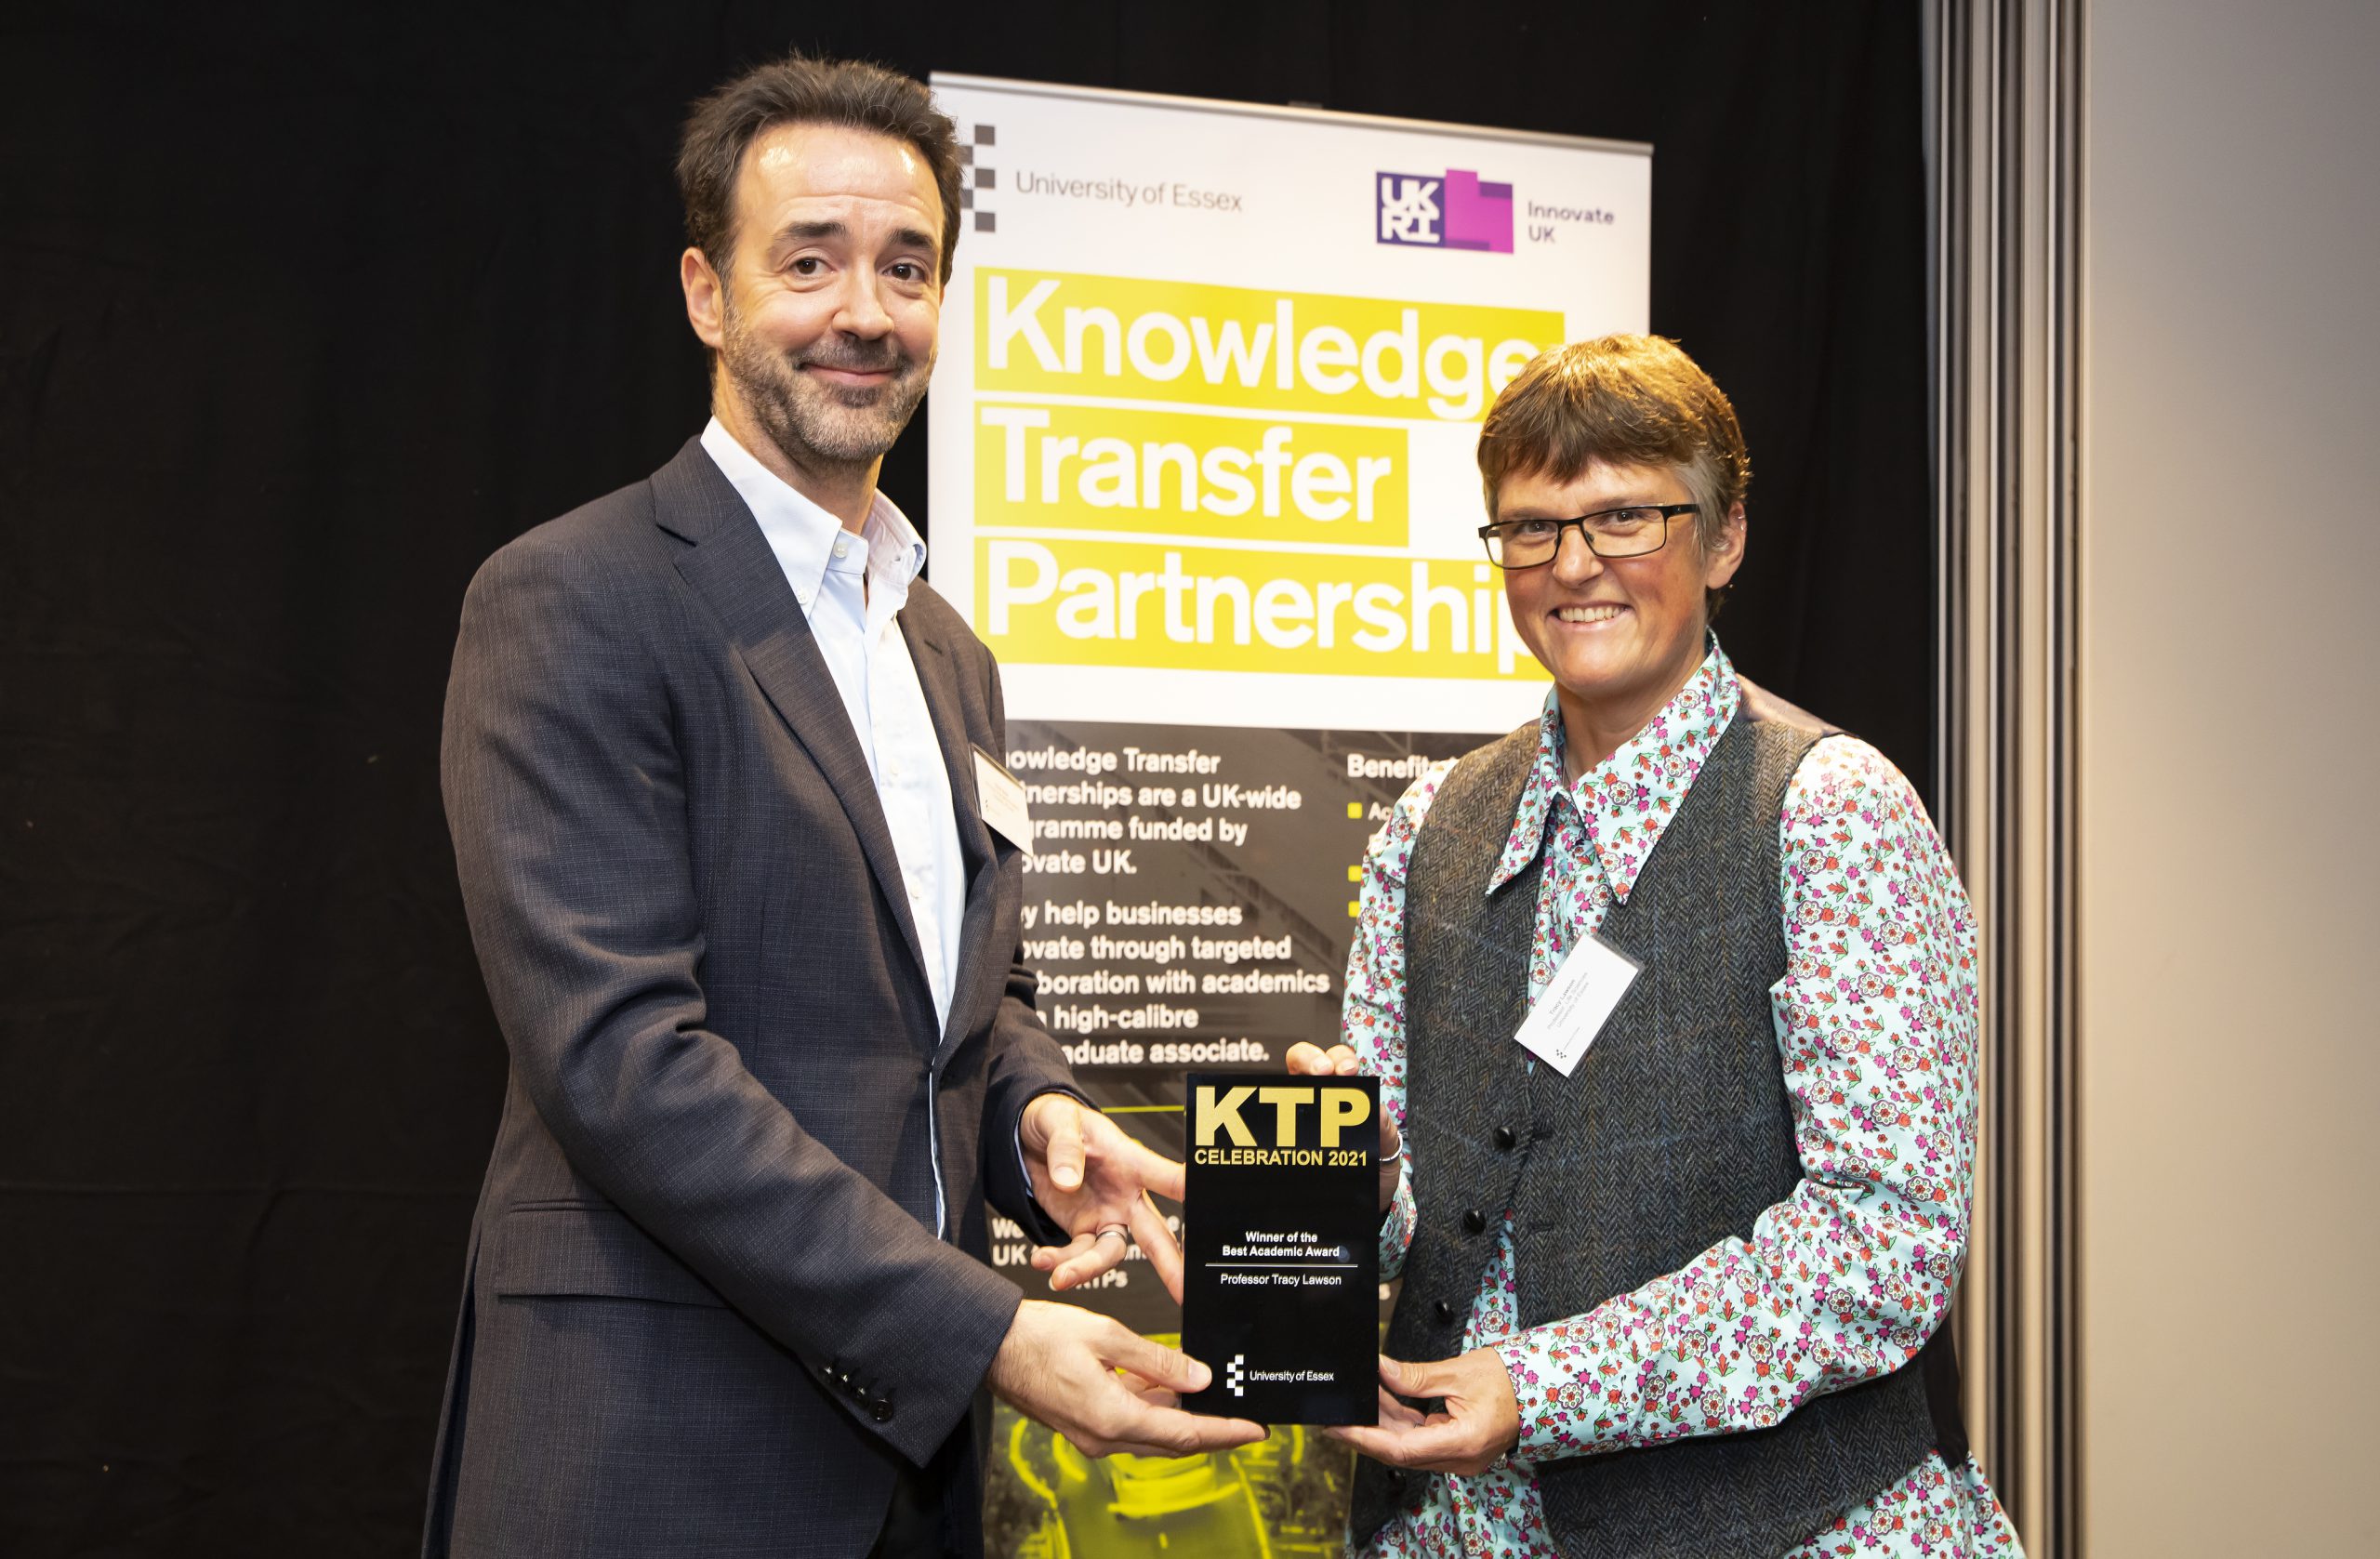 The University of Essex Tops UK Knowledge Transfer Partnership Tables